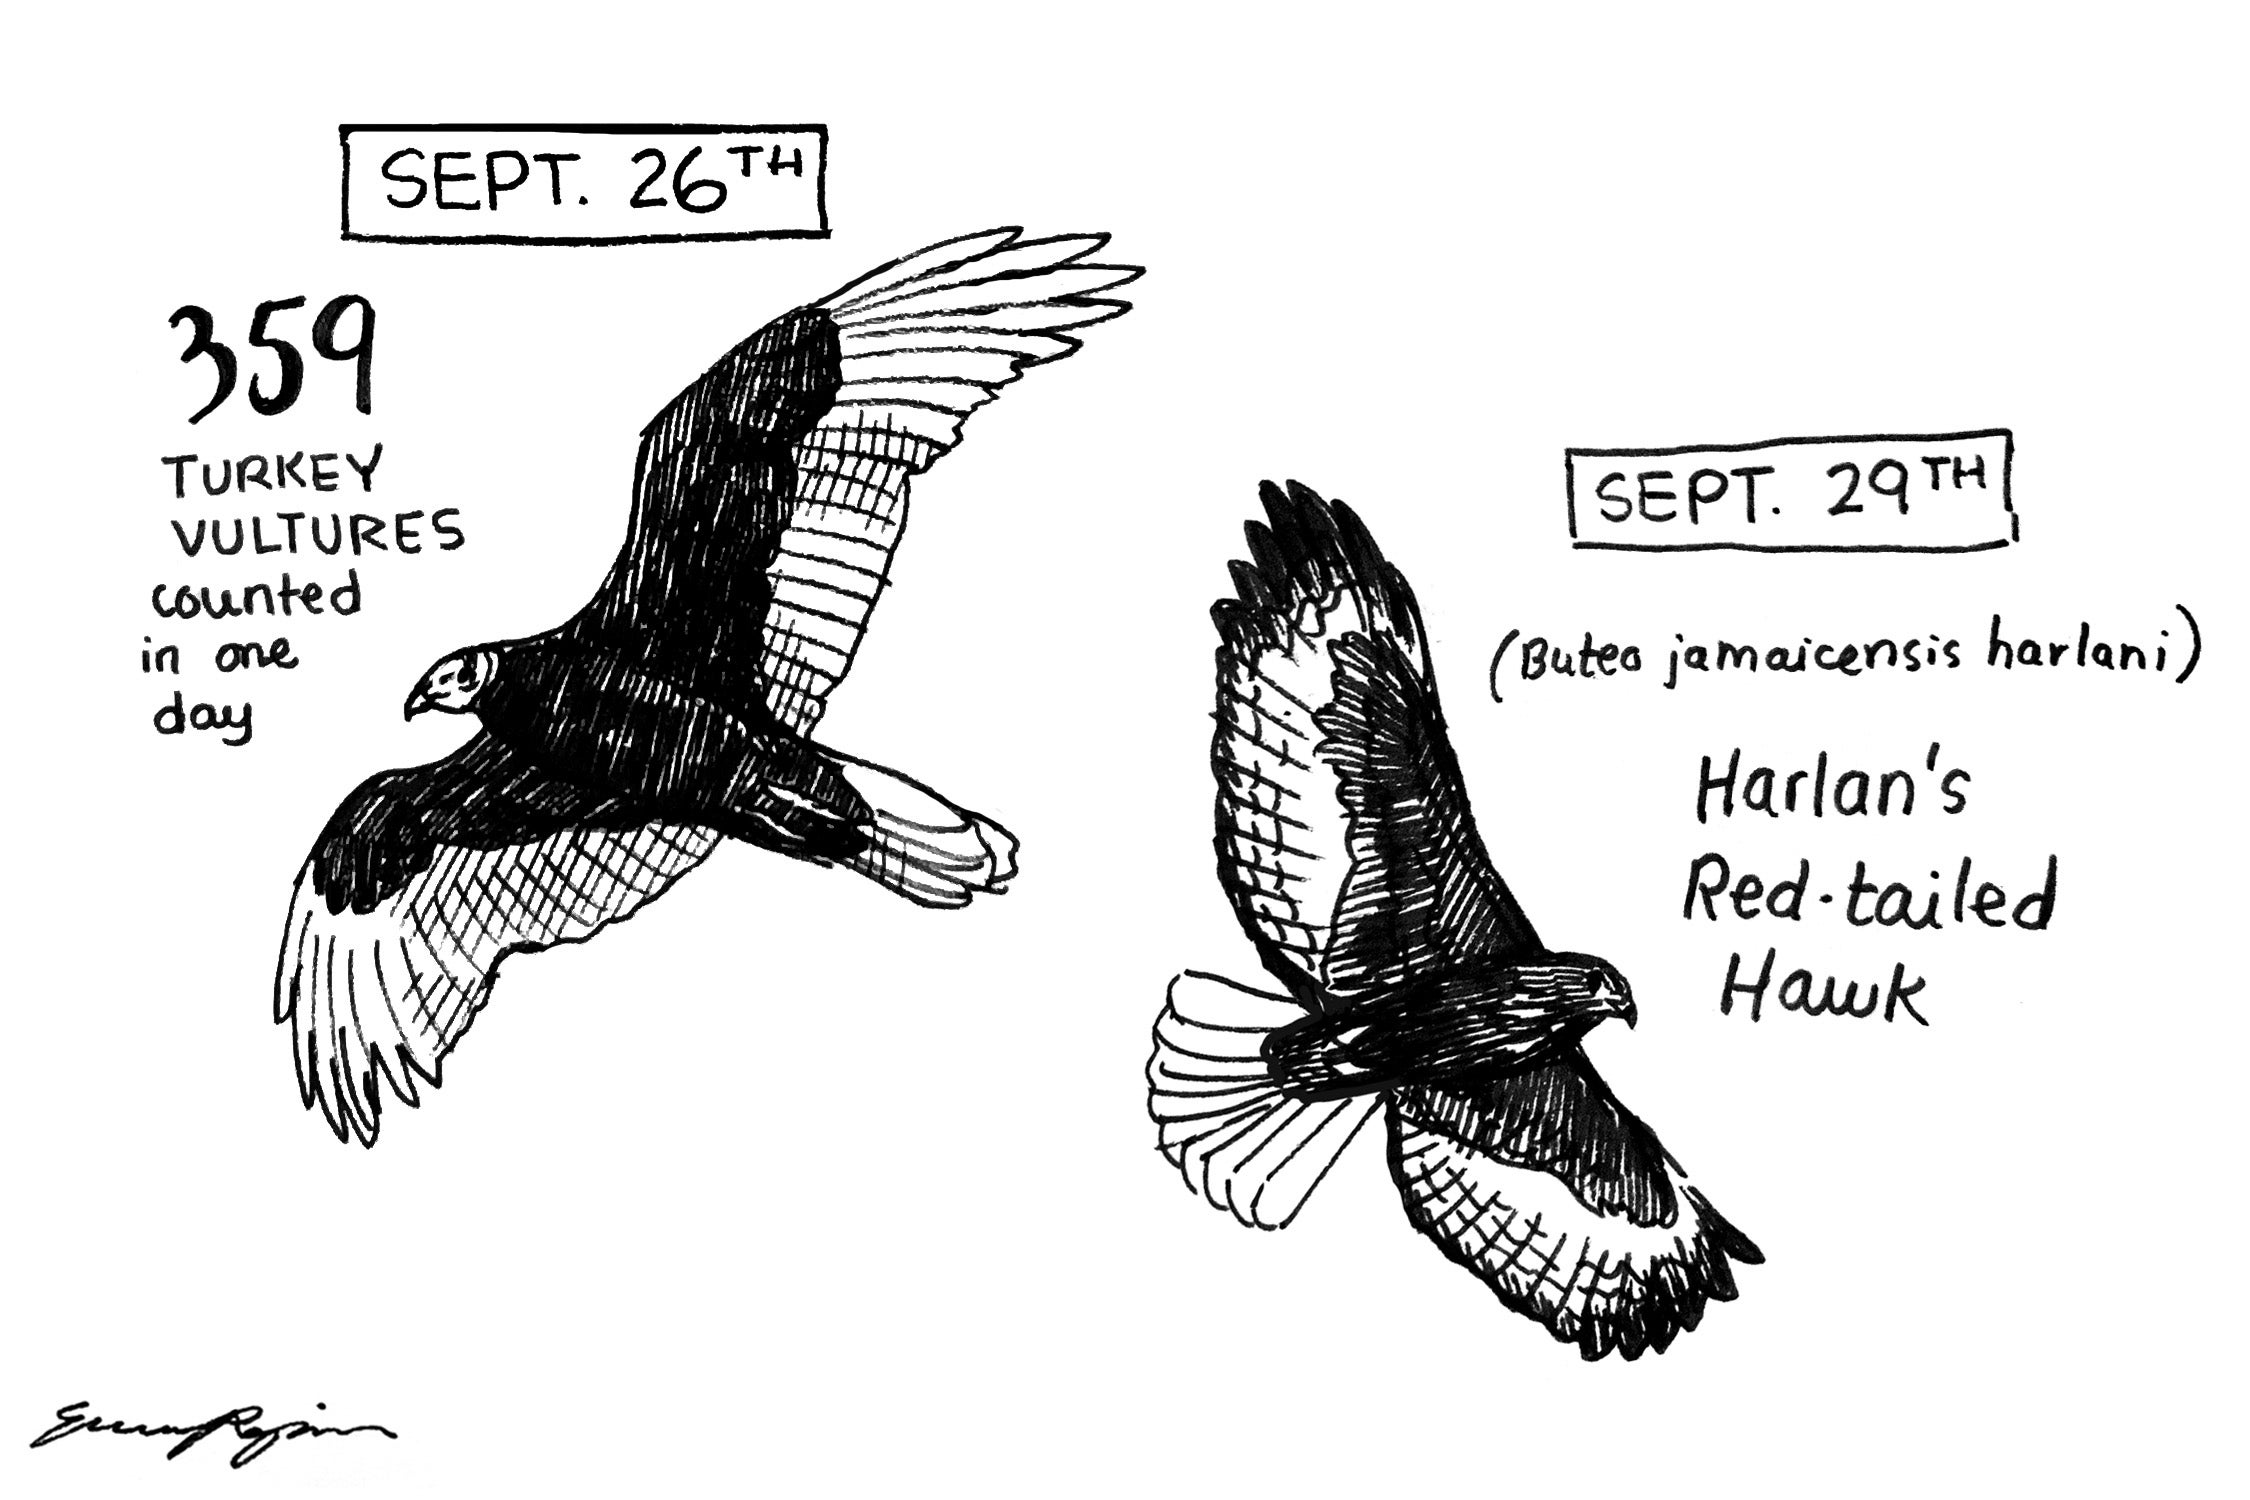 Emma's sketch of a turkey vulture and an all-dark Harlan's red-tailed hawk